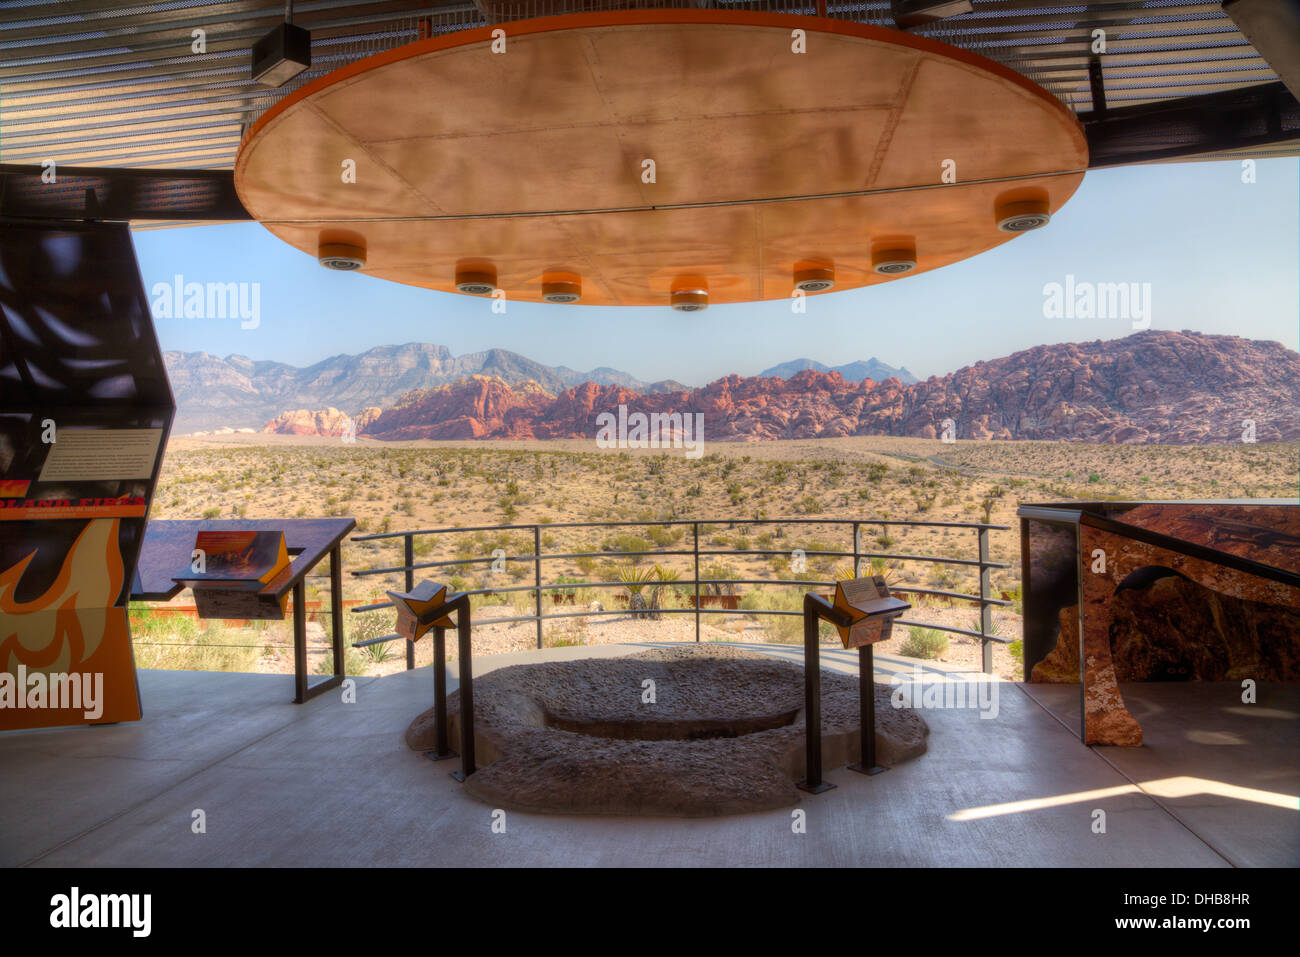 Red Rock Canyon National Conservation Area Visitor Center, Las Vegas, Nevada Stockfoto